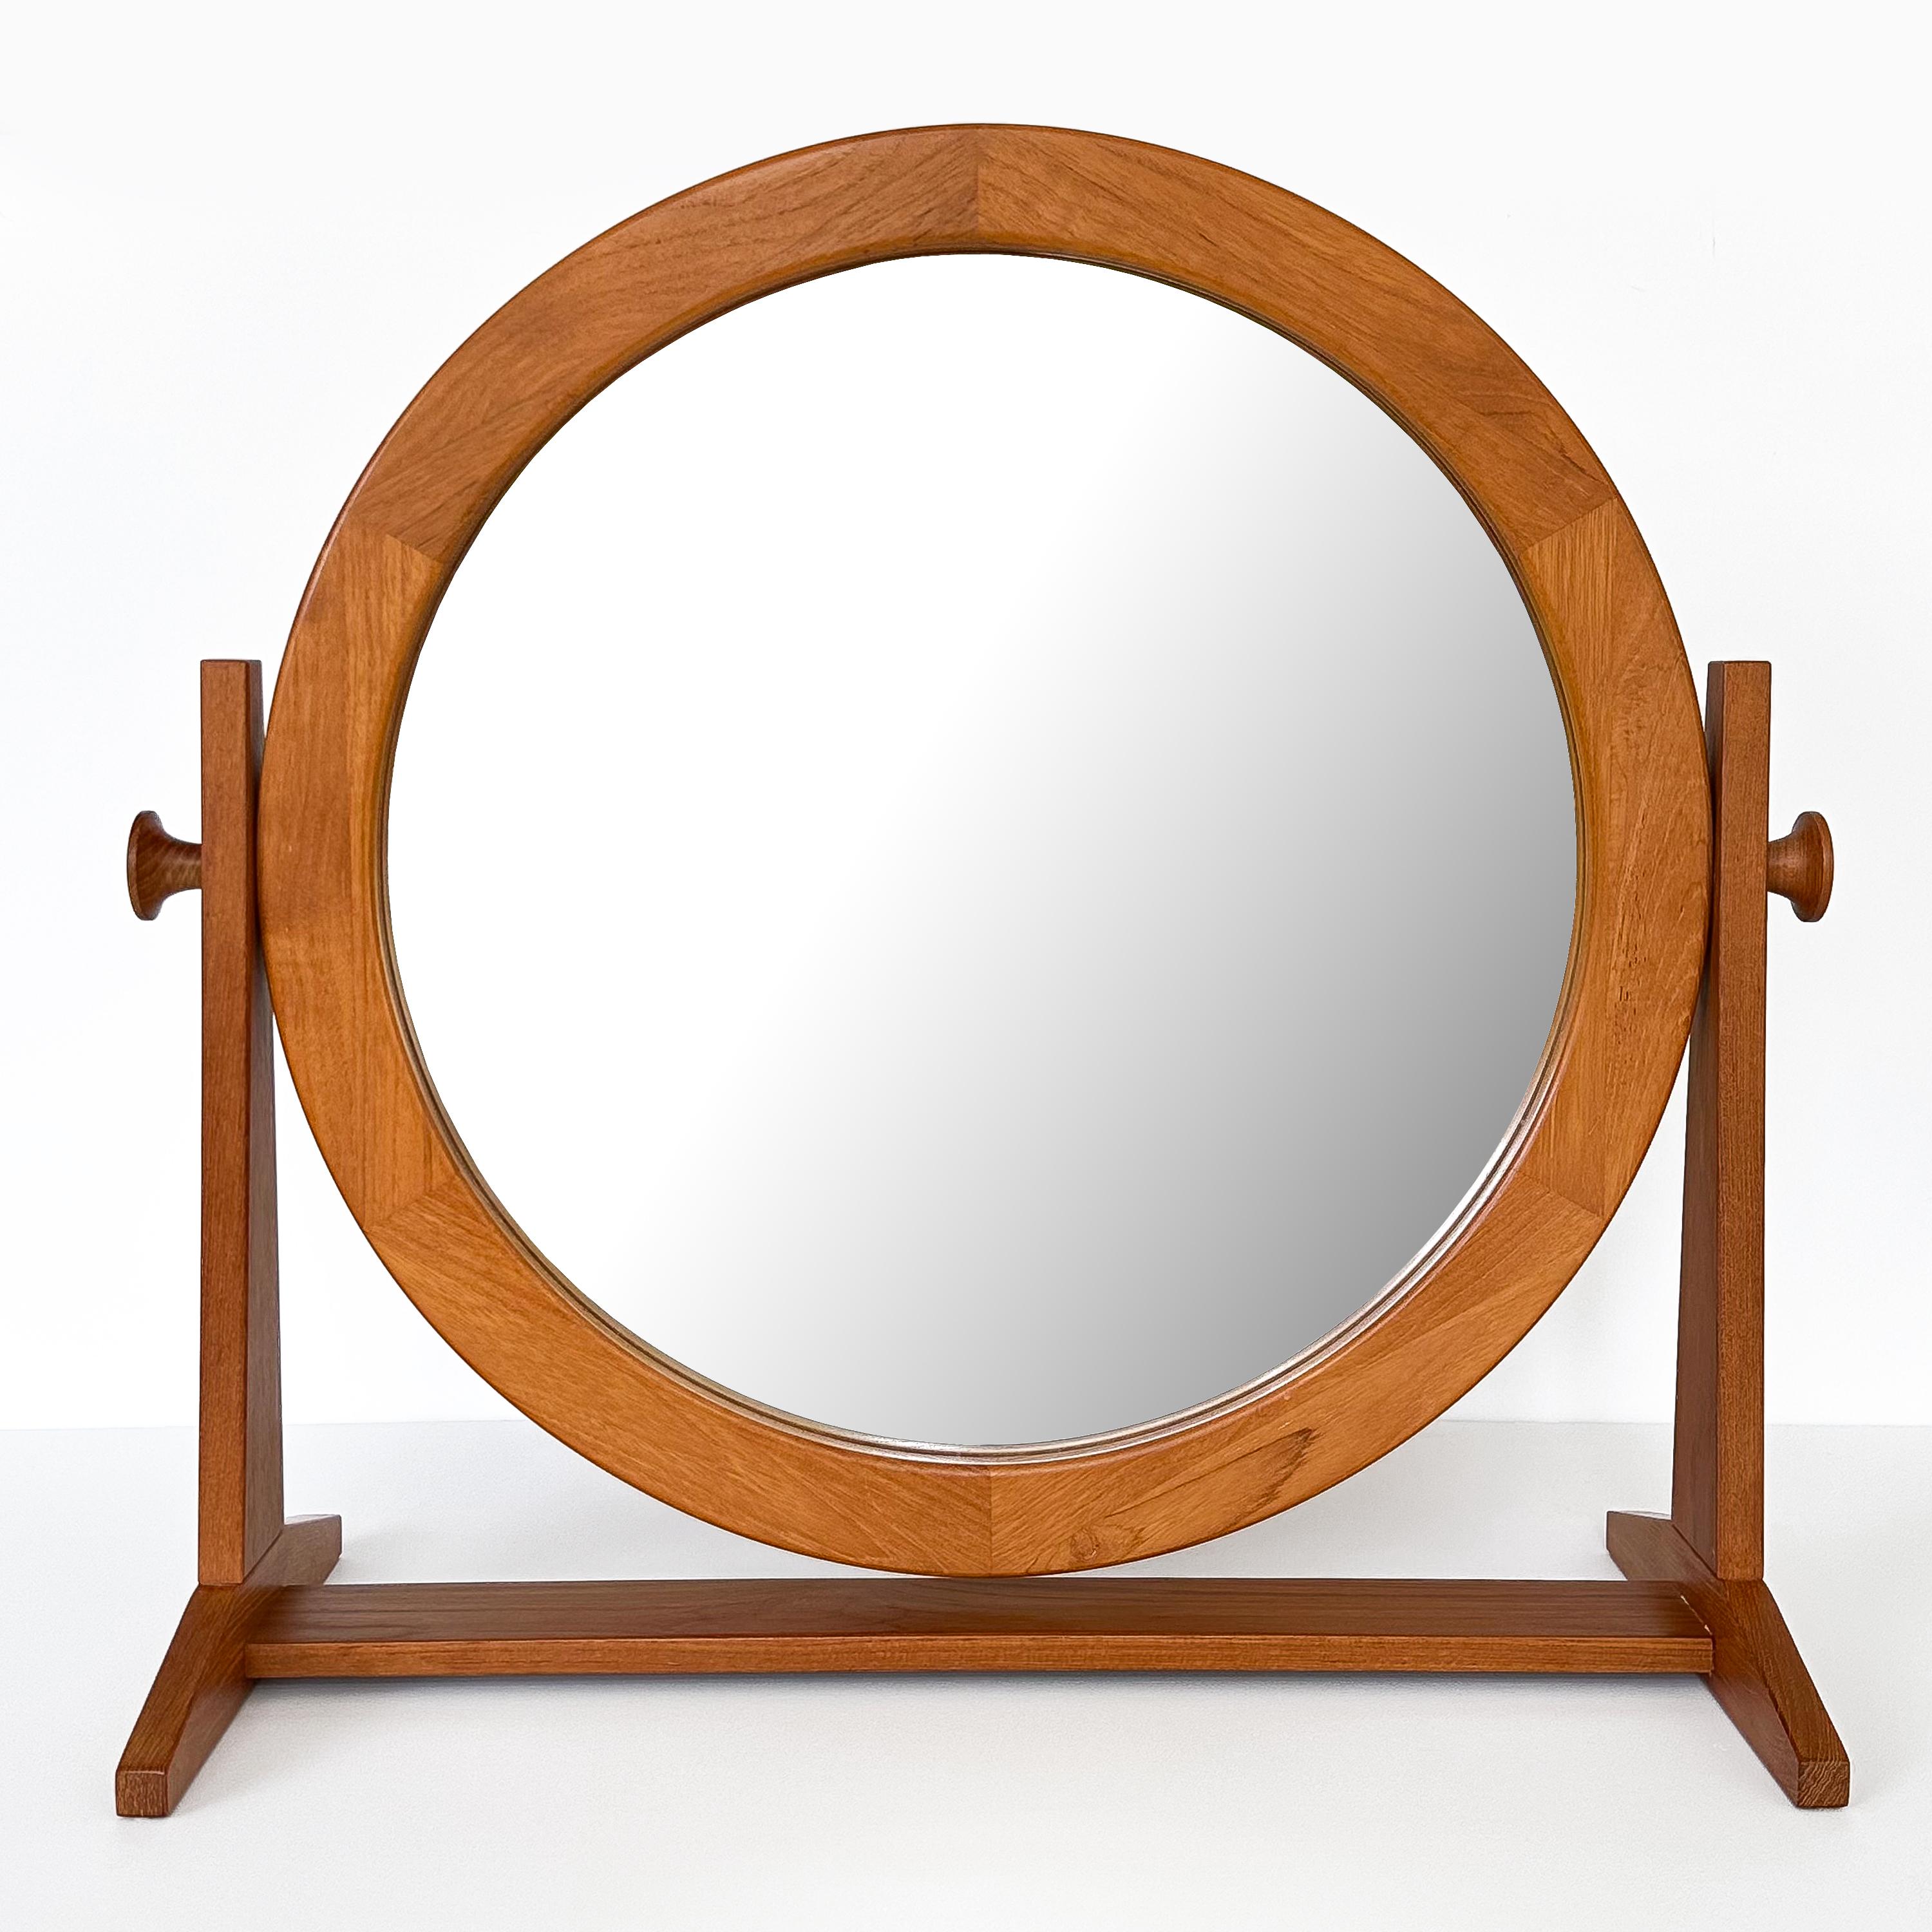 Transform your personal space with this exquisite, large tabletop vanity mirror by Pedersen & Hansen, Denmark, circa 1970s. A true symbol of Danish design sensibility, this mirror combines practicality and aesthetics in a piece that stands the test